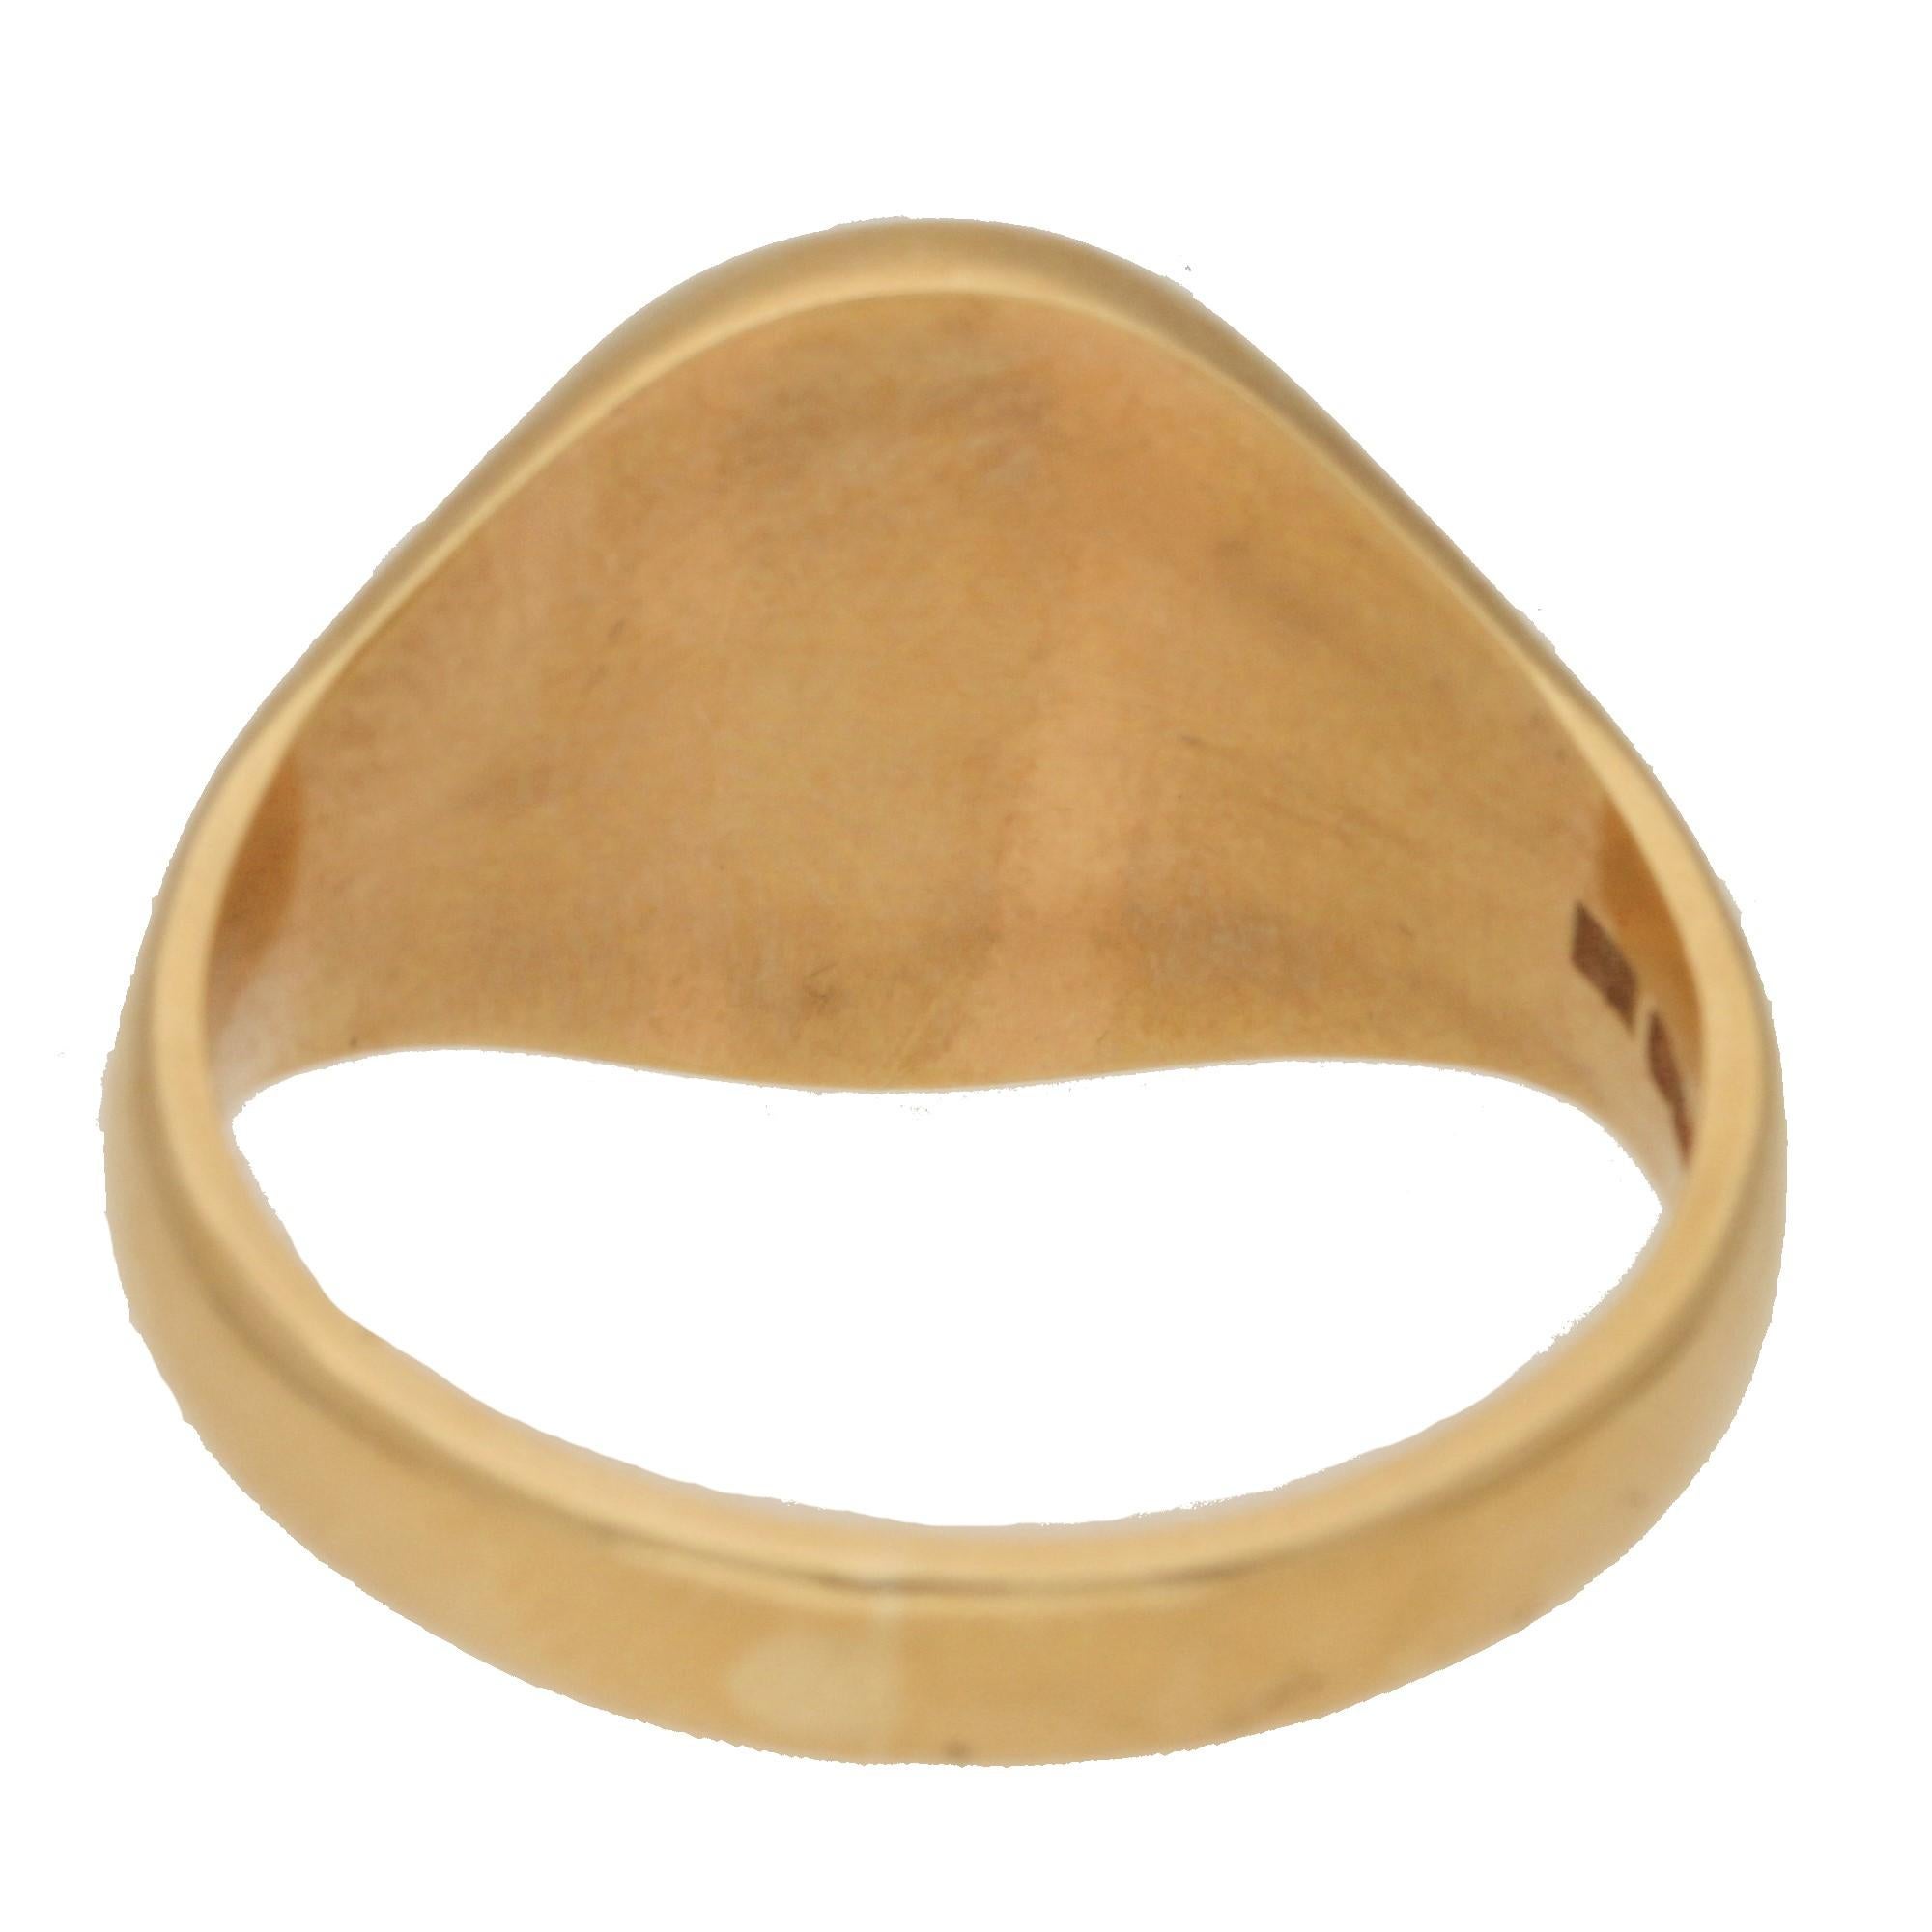 Modern Oval Signet Ring in Solid 9 Karat Yellow Gold